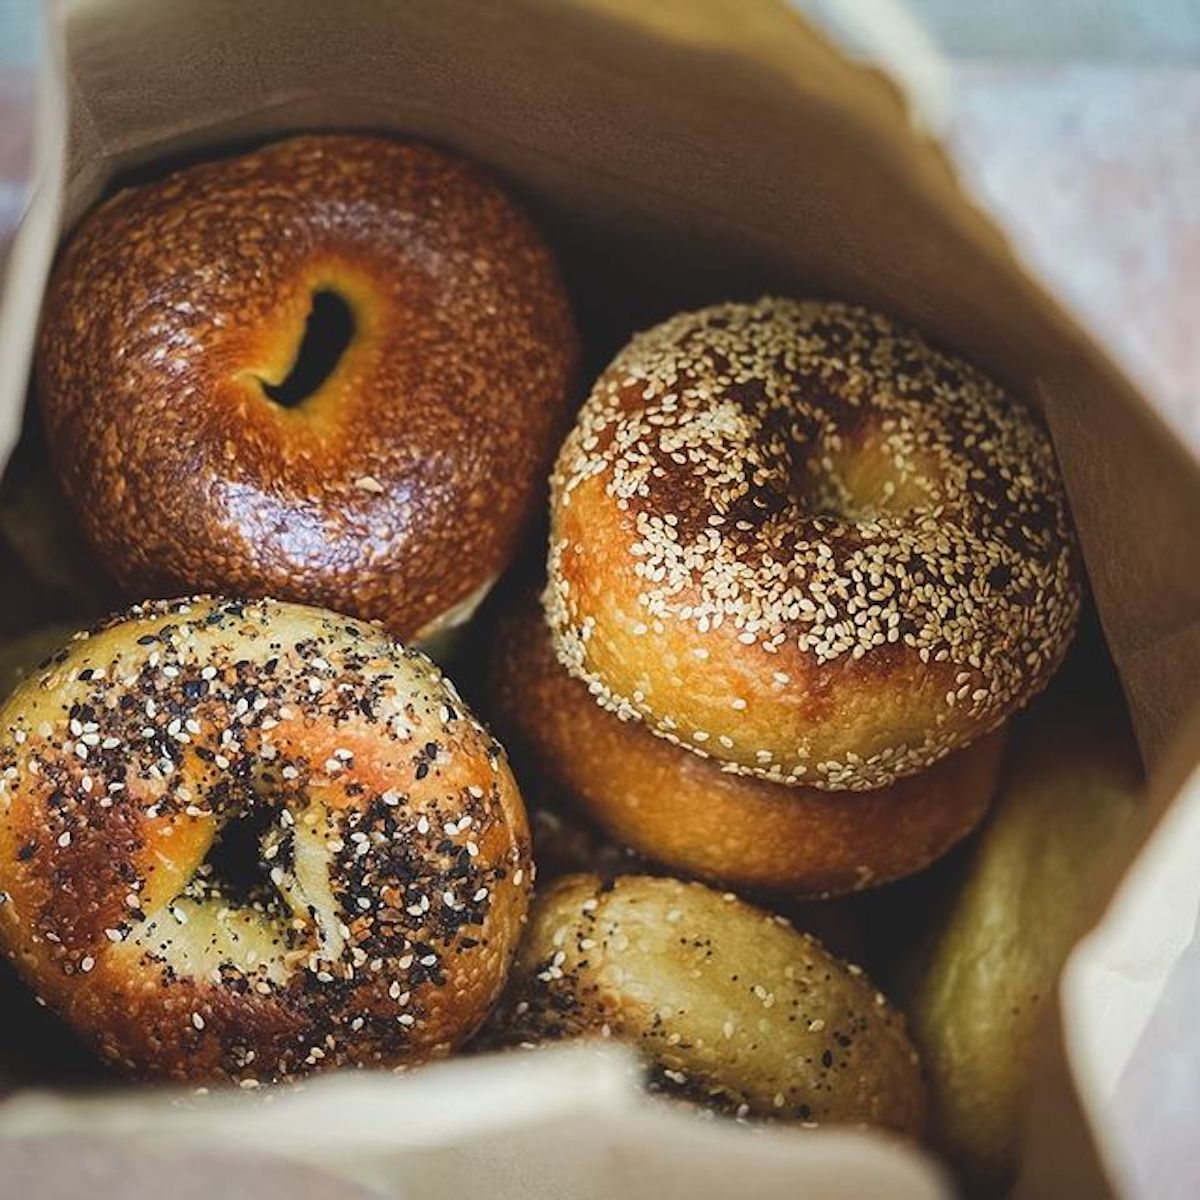 Bagelfeld’s Rounds Out Phoenix Breakfast Scene with Brick-and-Mortar